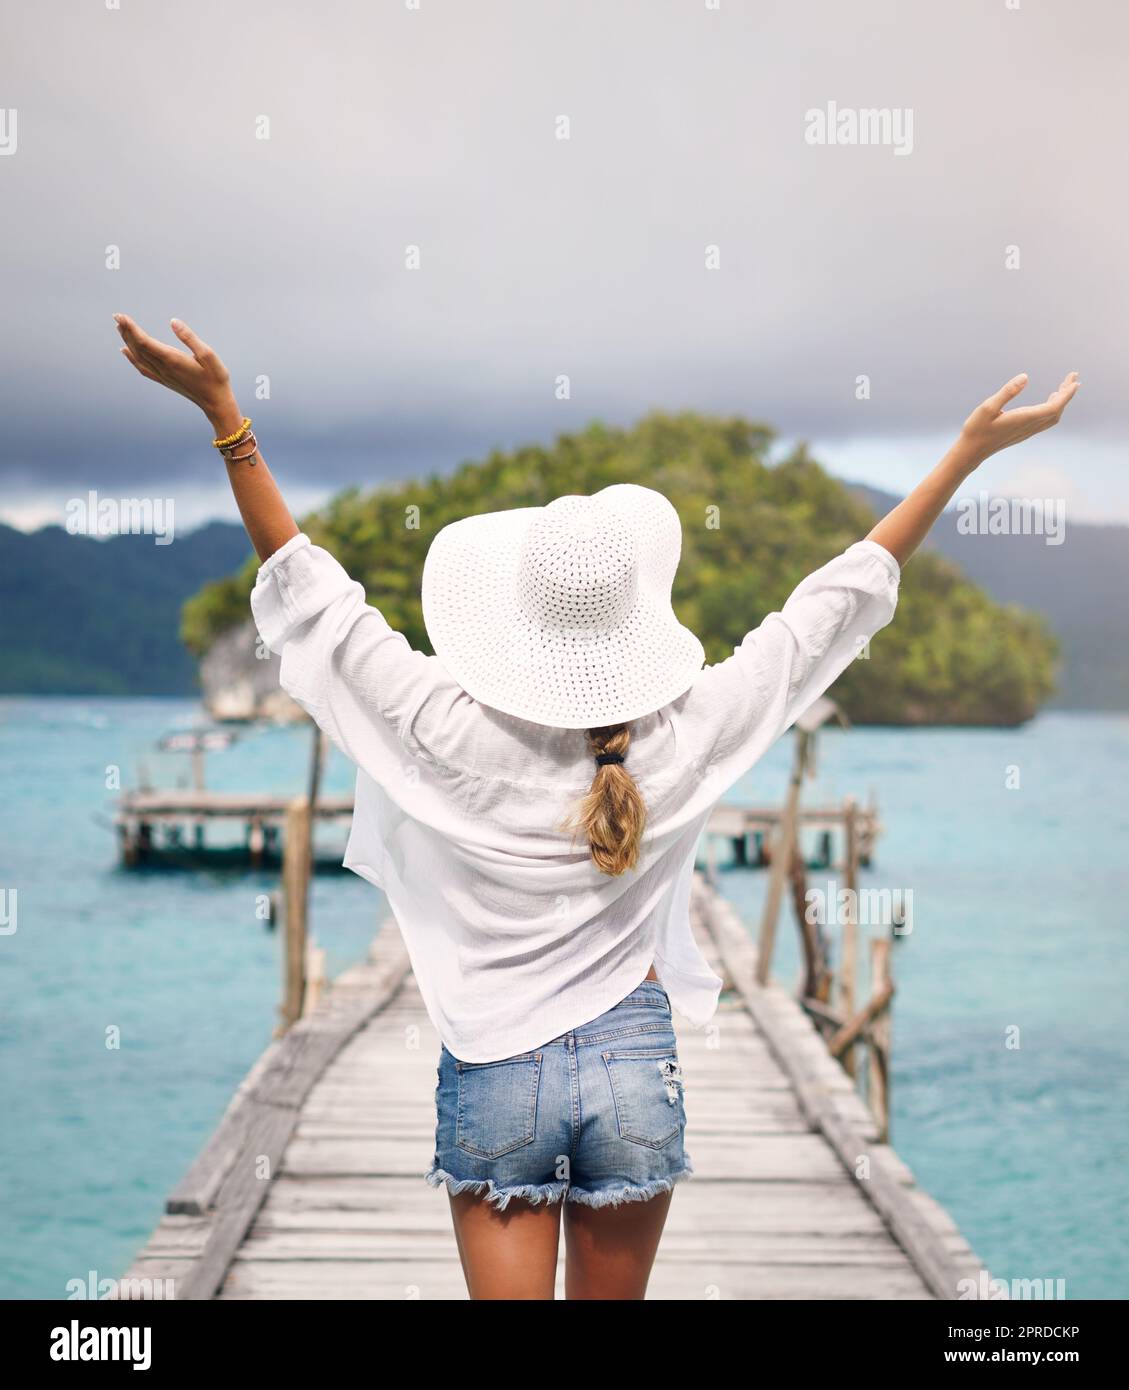 I waited so long for this holiday. Rearview shot of an unrecognizable woman standing with her arms raised on a boardwalk overlooking the sea during vacation. Stock Photo